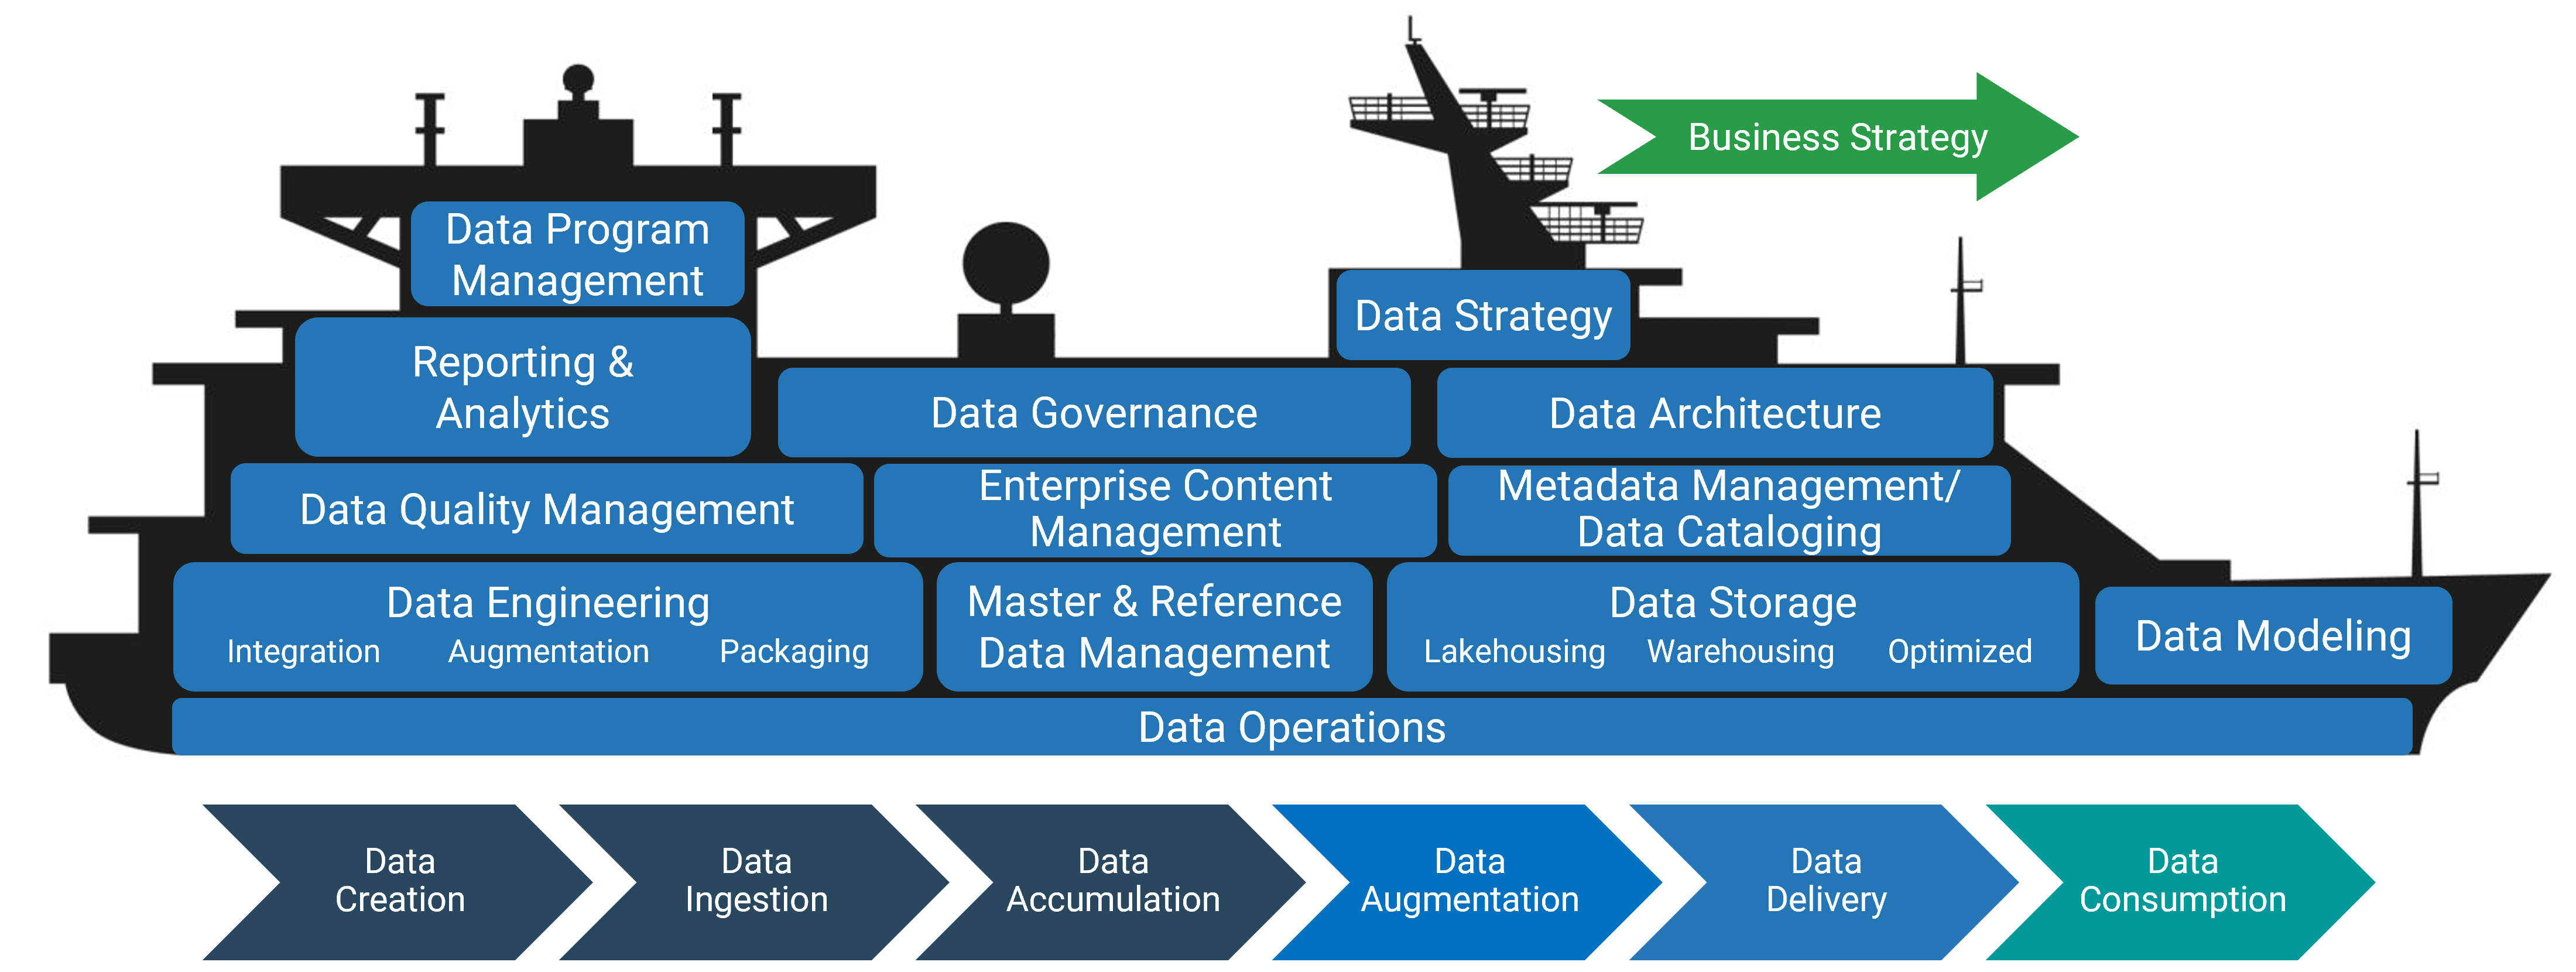 A similar concept to the last one, with a ship moving toward 'Business Strategy', except the ship is cross-sectioned with different capabilities filling the interior of the silhouette. Below are different steps in data management 'Data Creation', 'Data Ingestion', 'Data Accumulation, 'Data Augmentation', 'Data Delivery', and 'Data Consumption'.